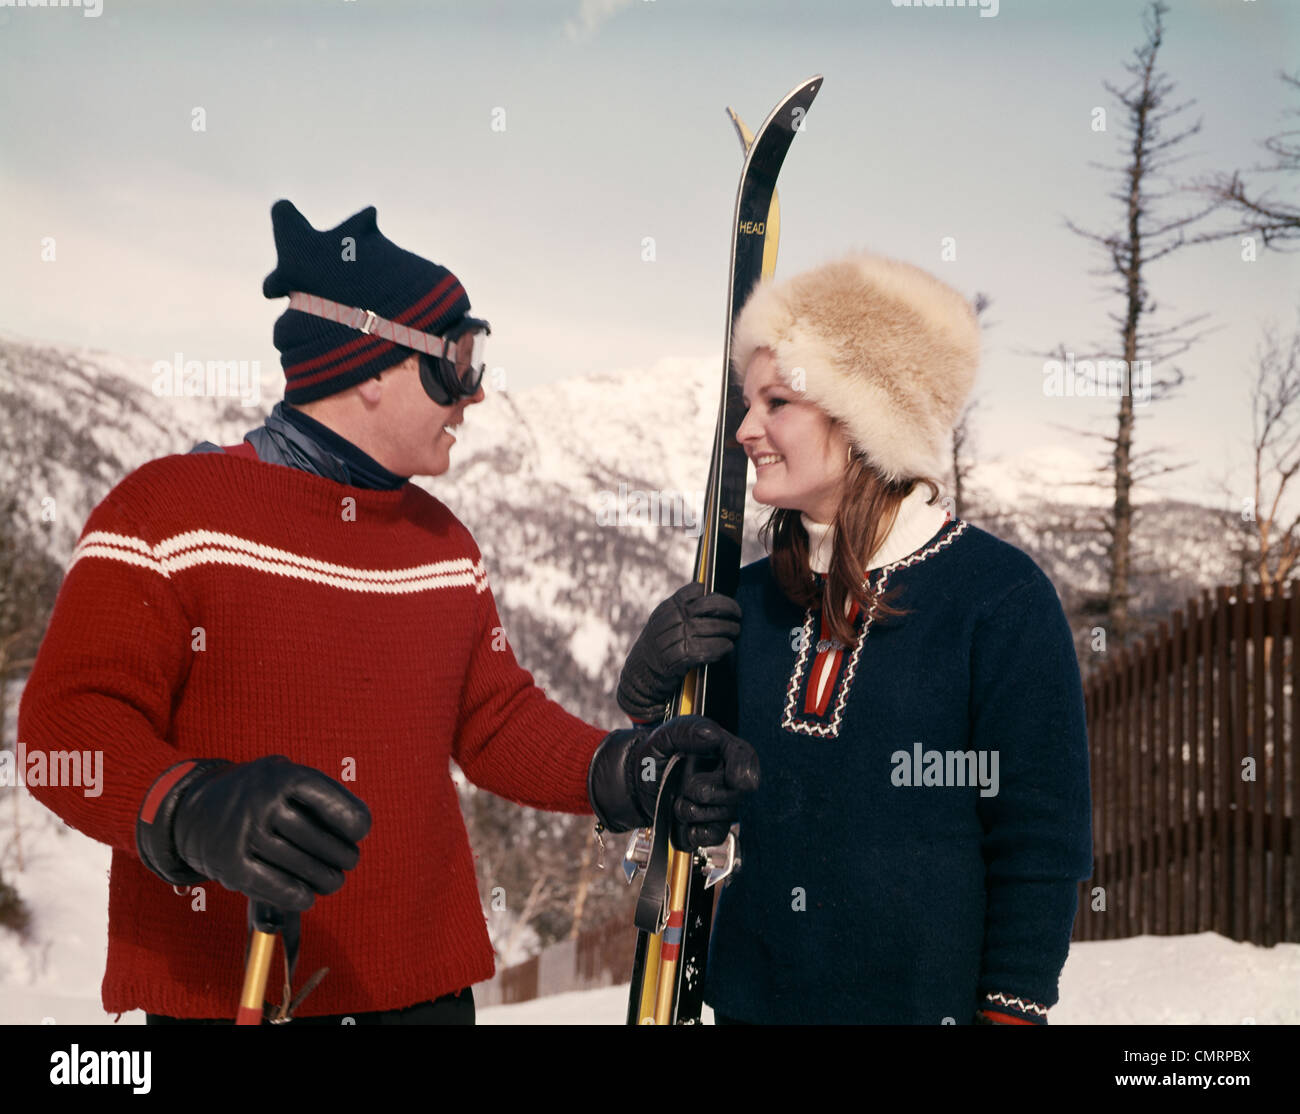 YOUNG COUPLE HUSBAND AND WIFE IN SNOW PREPARING FOR SKIING WINTER OUTDOOR Stock Photo